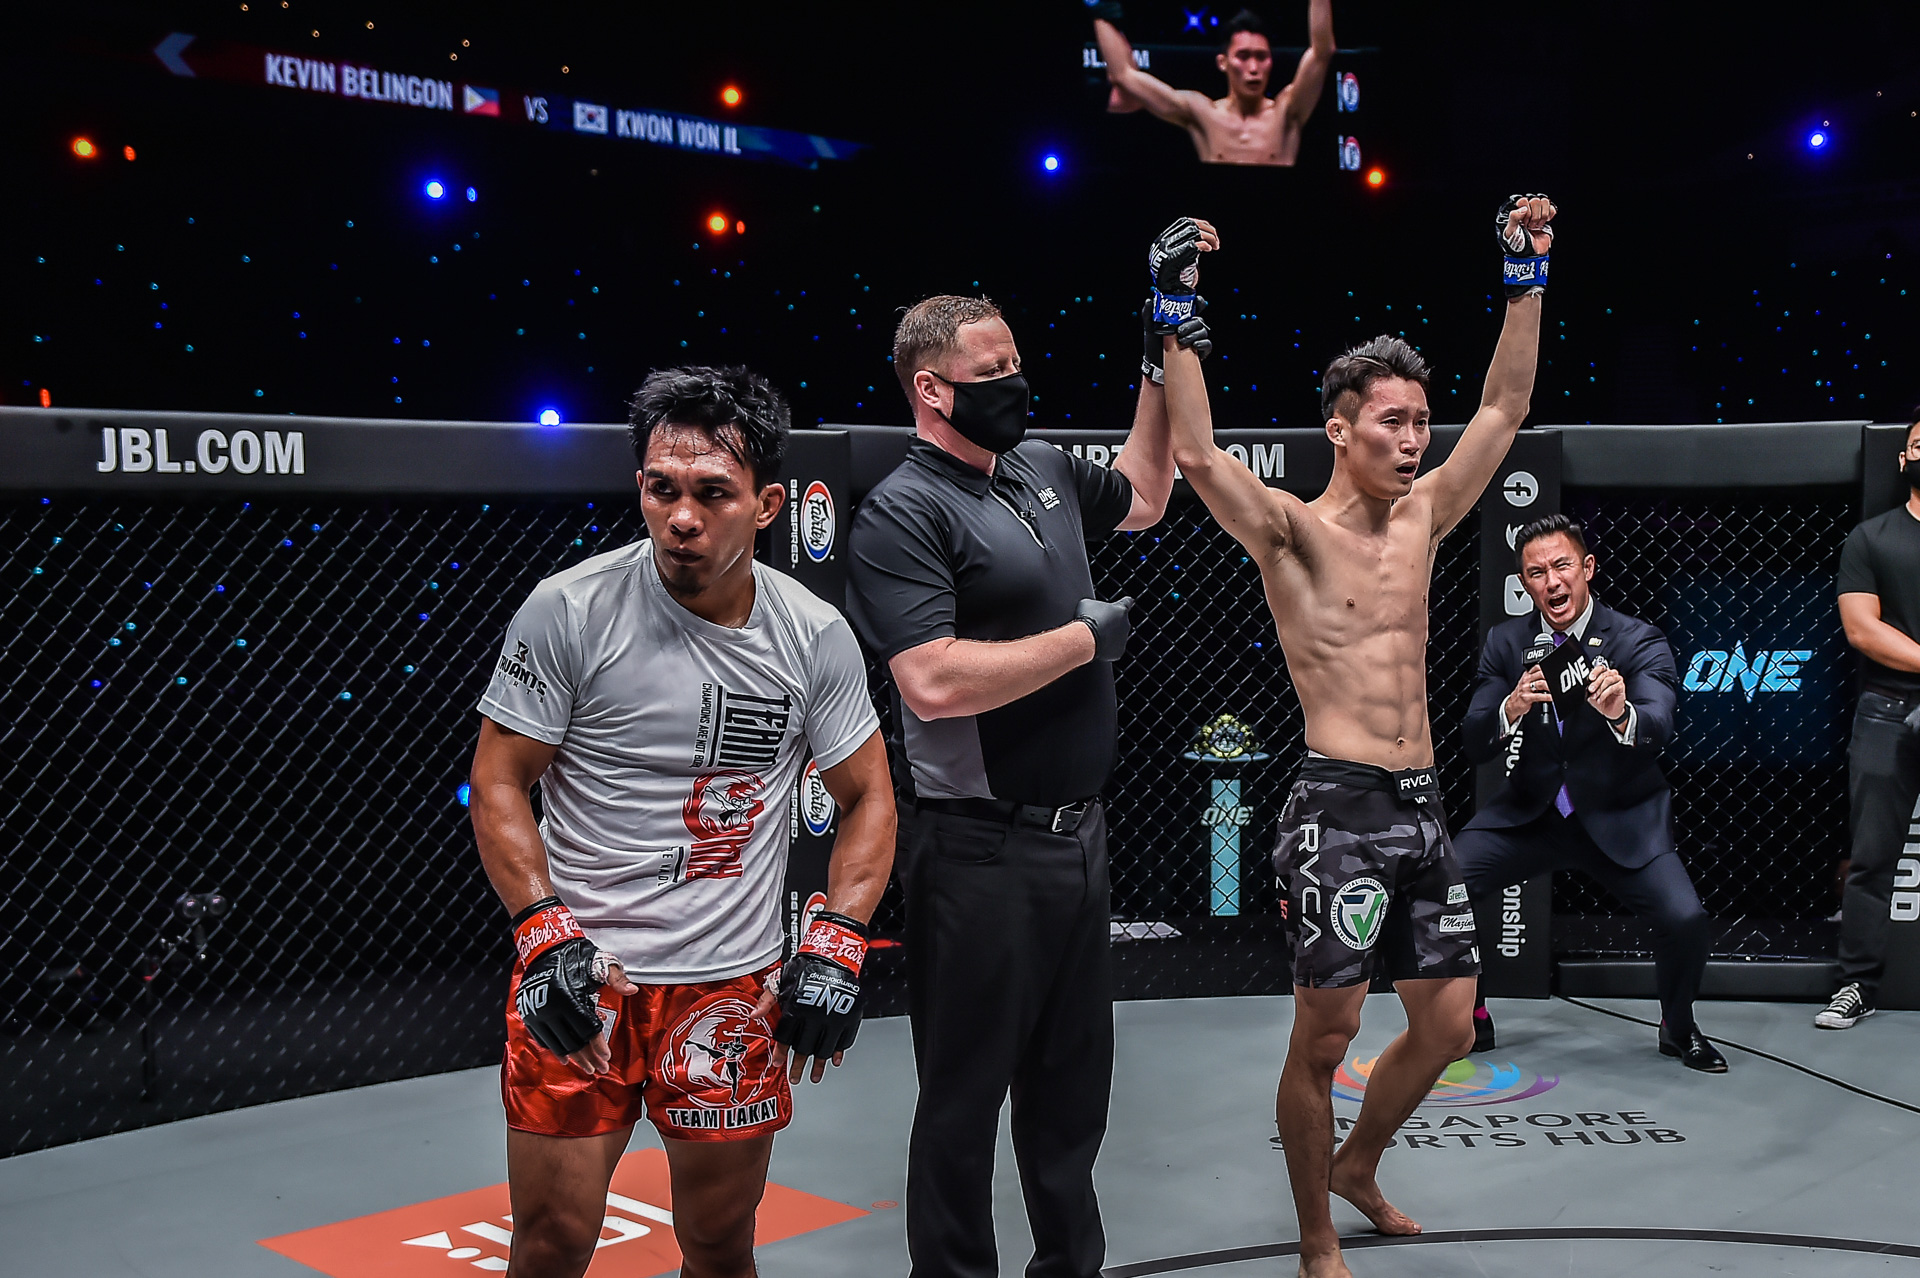 ONE-Winter-Warrior-Kwon-Won-Il-def-Kevin-Belingon-2 Kevin Belingon suffers stunning TKO loss in ONE: Winter Warriors Mixed Martial Arts News ONE Championship  - philippine sports news